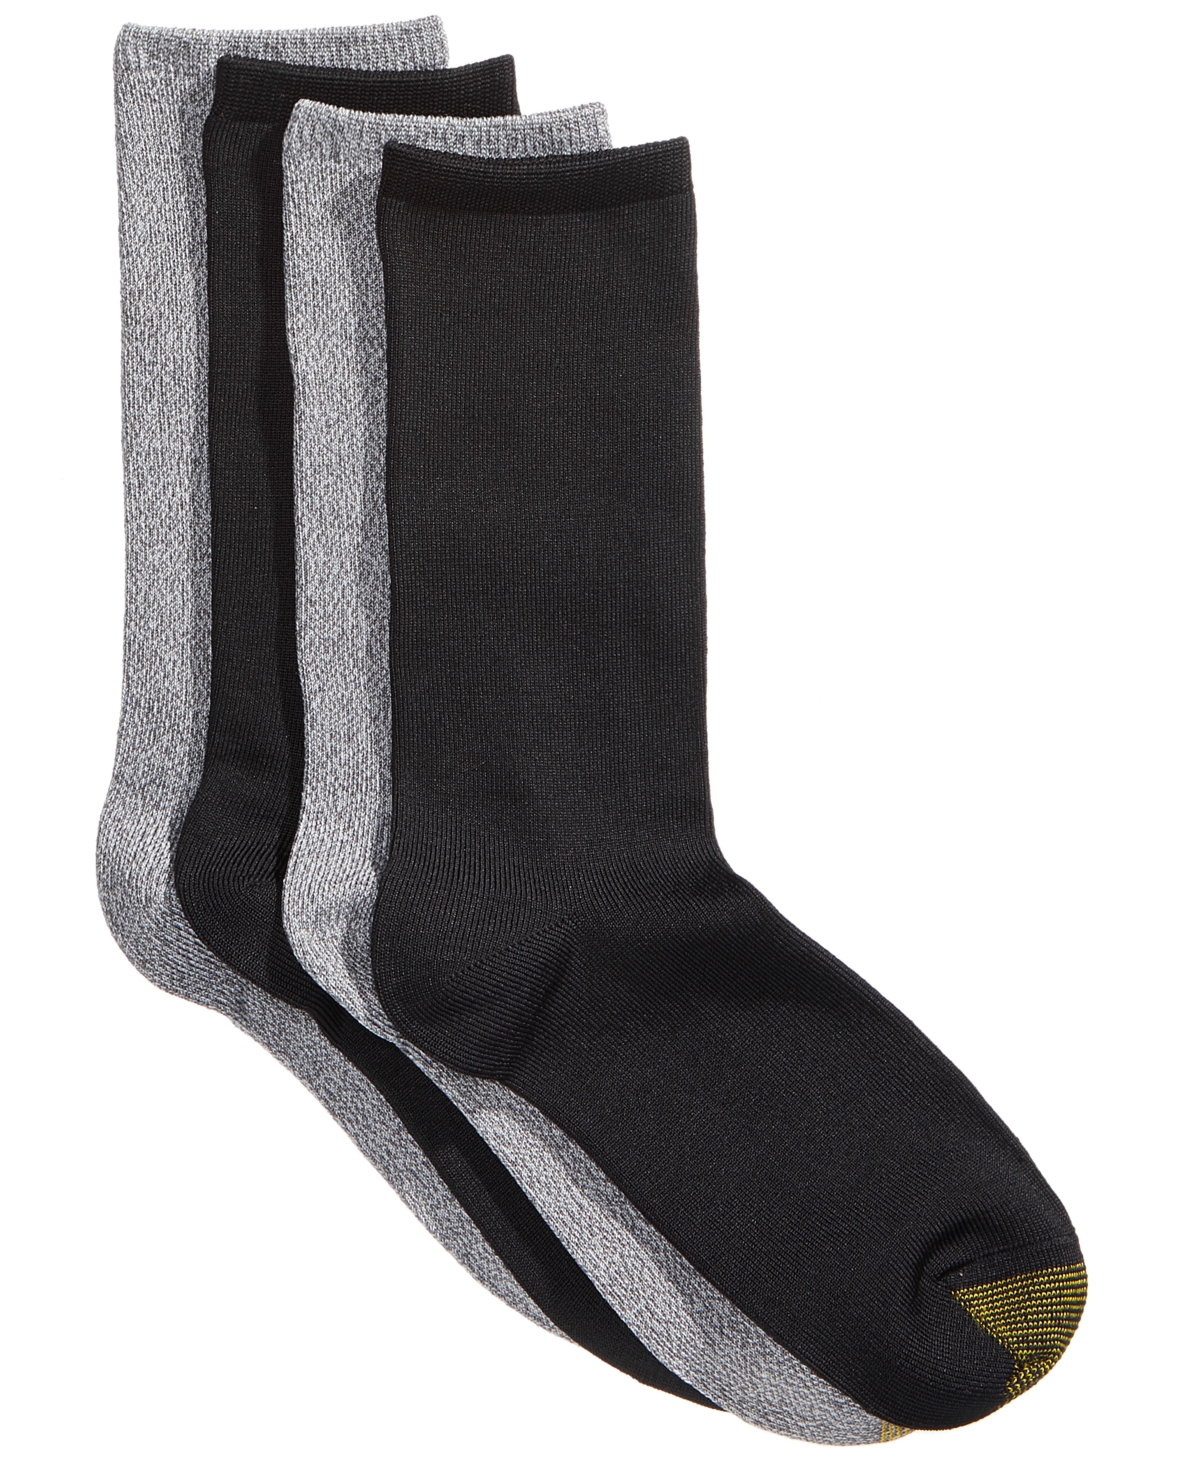 Women's 4-Pack Casual Ultra-Soft Socks, Created For Macys - Black/Grey Assorted